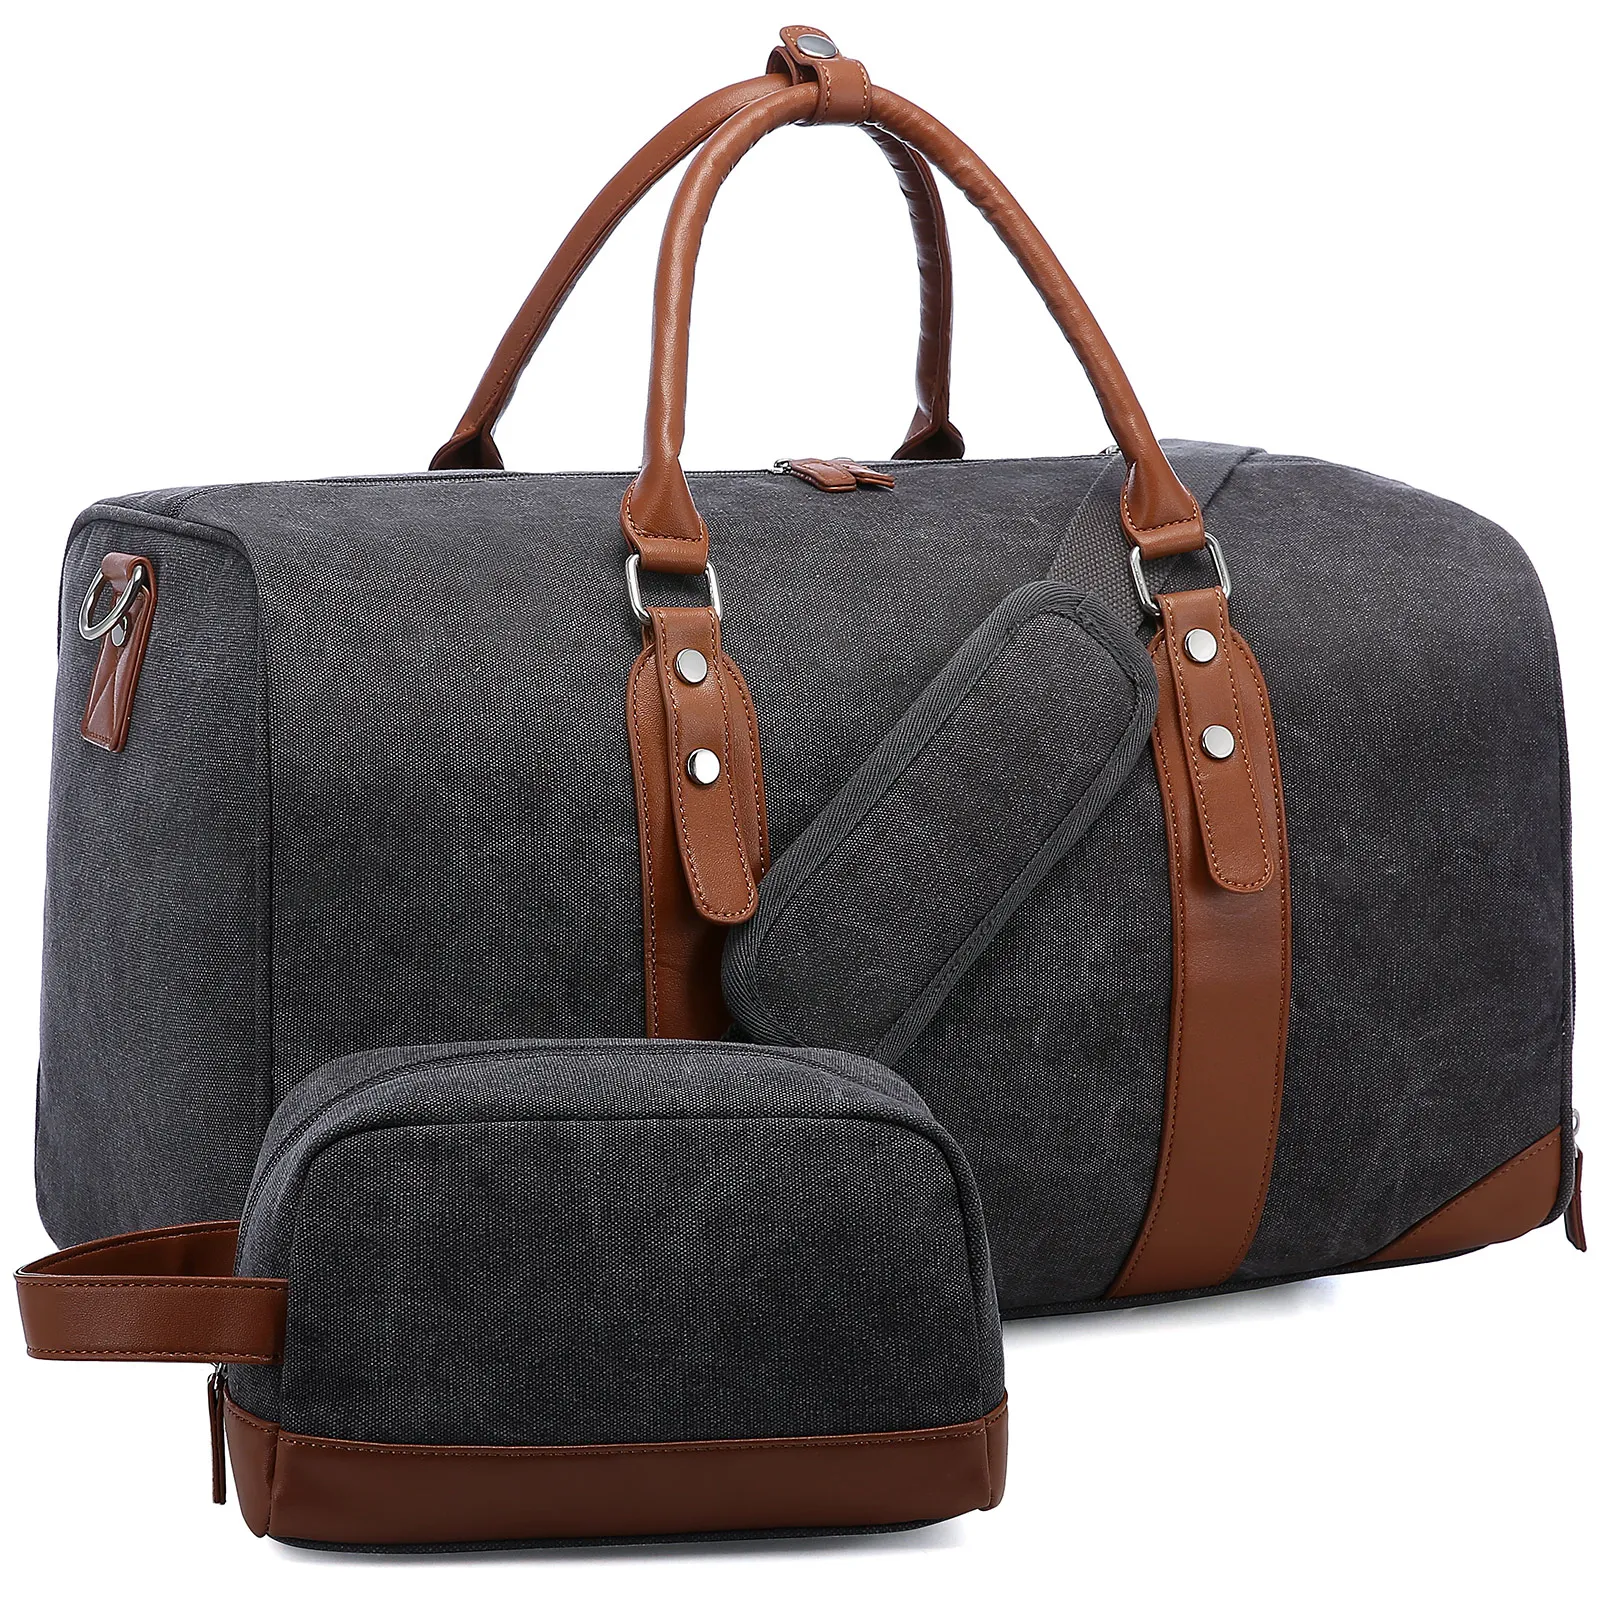 

LOVEVOOK 2022 factory wholesale canvas large men women travel bags With Shoe Compartment Toiletry bag weekender duffle bags